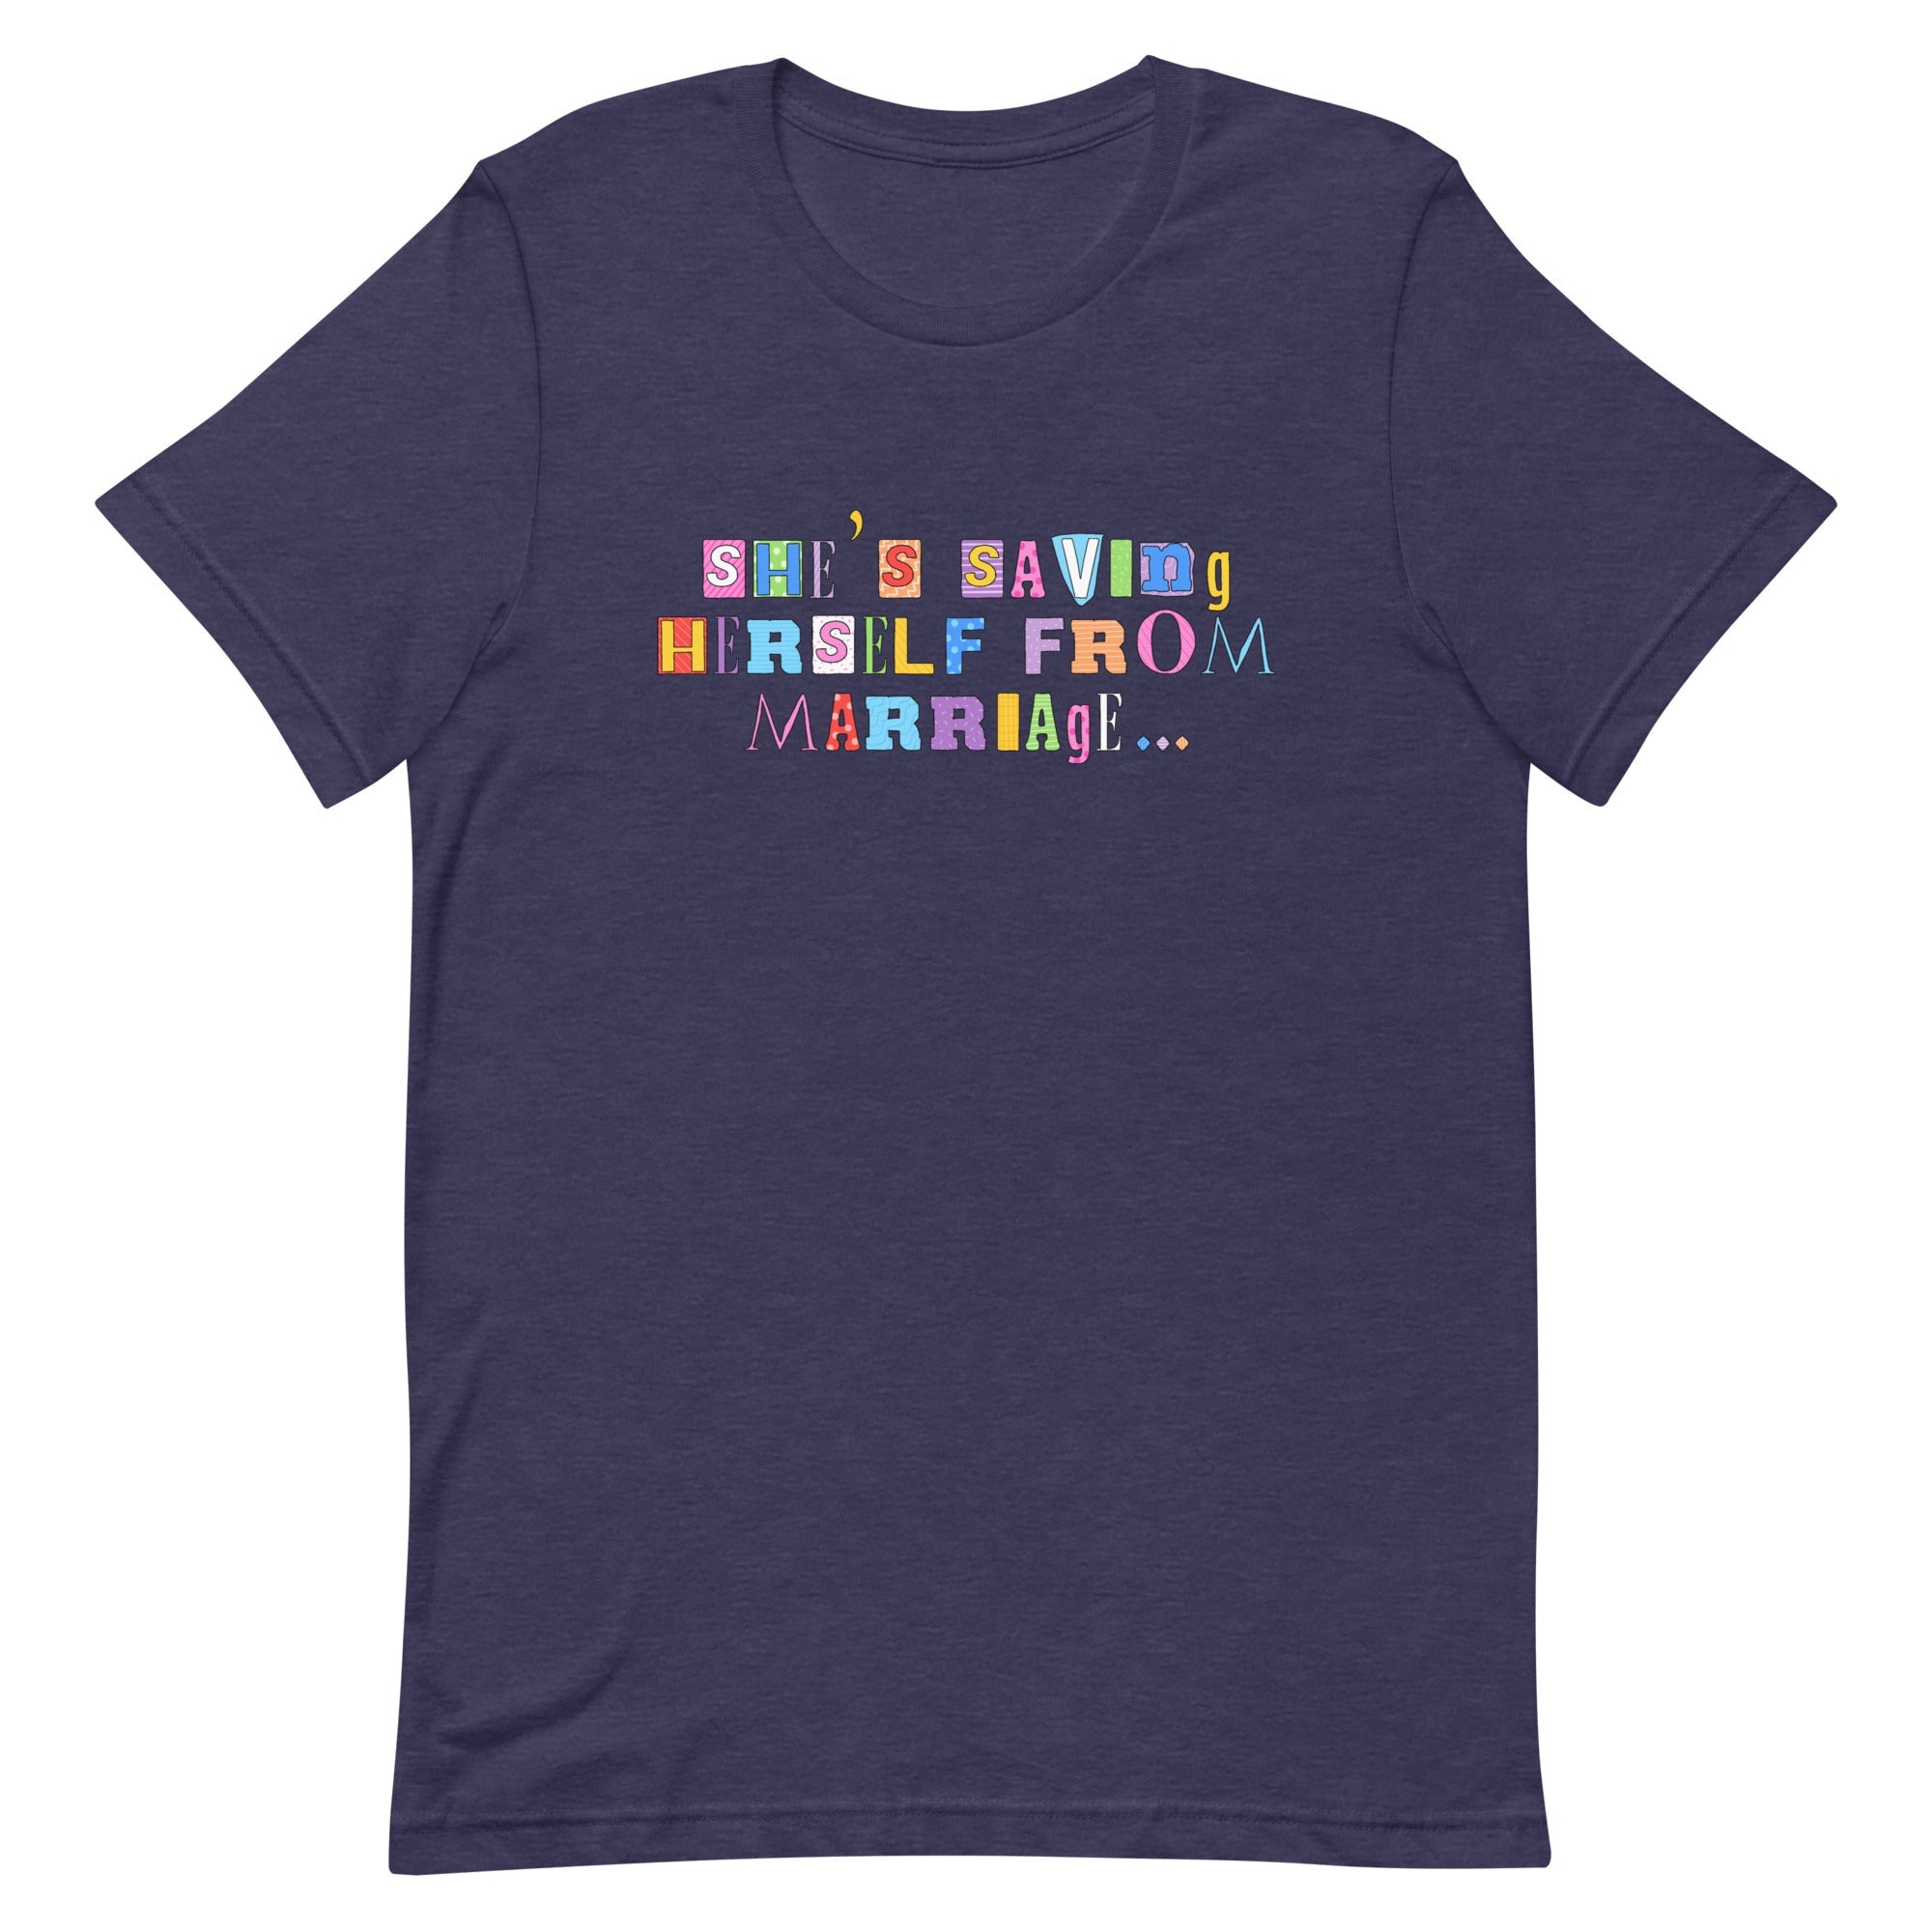 heather-midnight-navy-feminist-t-shirt-shes-saving-herself-from-marriage - Women's Rights Shirts 